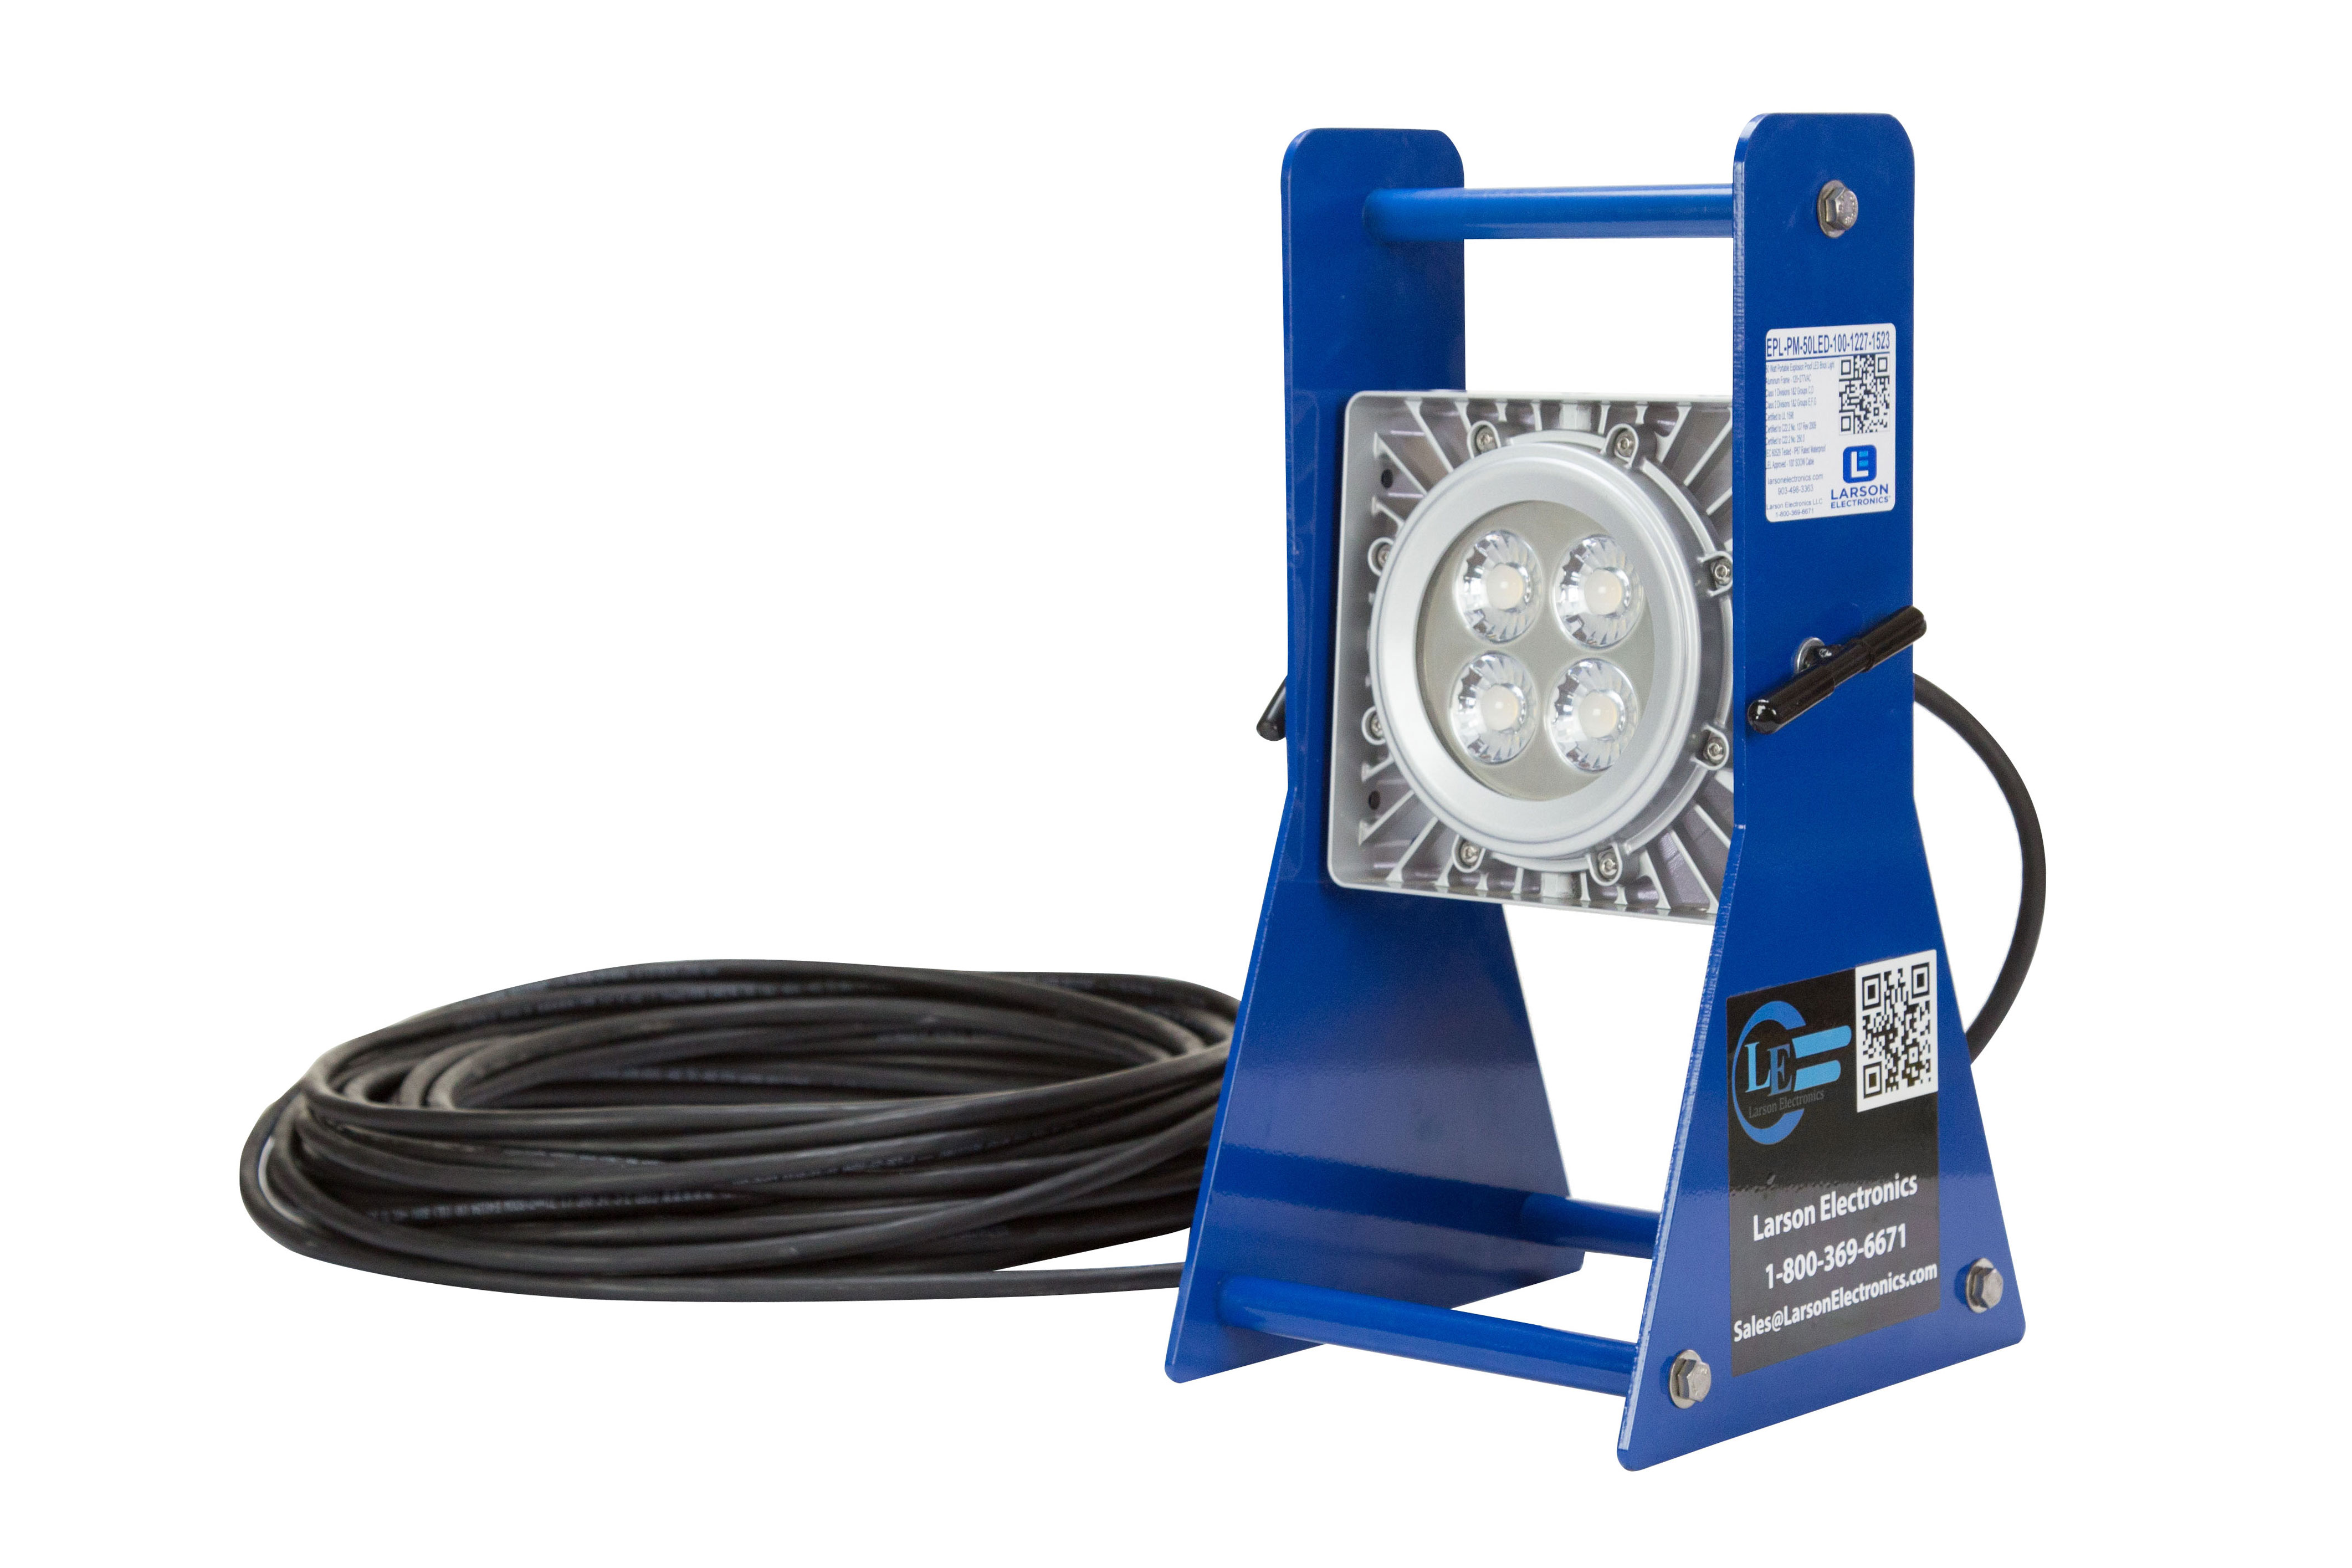 Portable Explosion Proof LED Work Light with 100' Cord